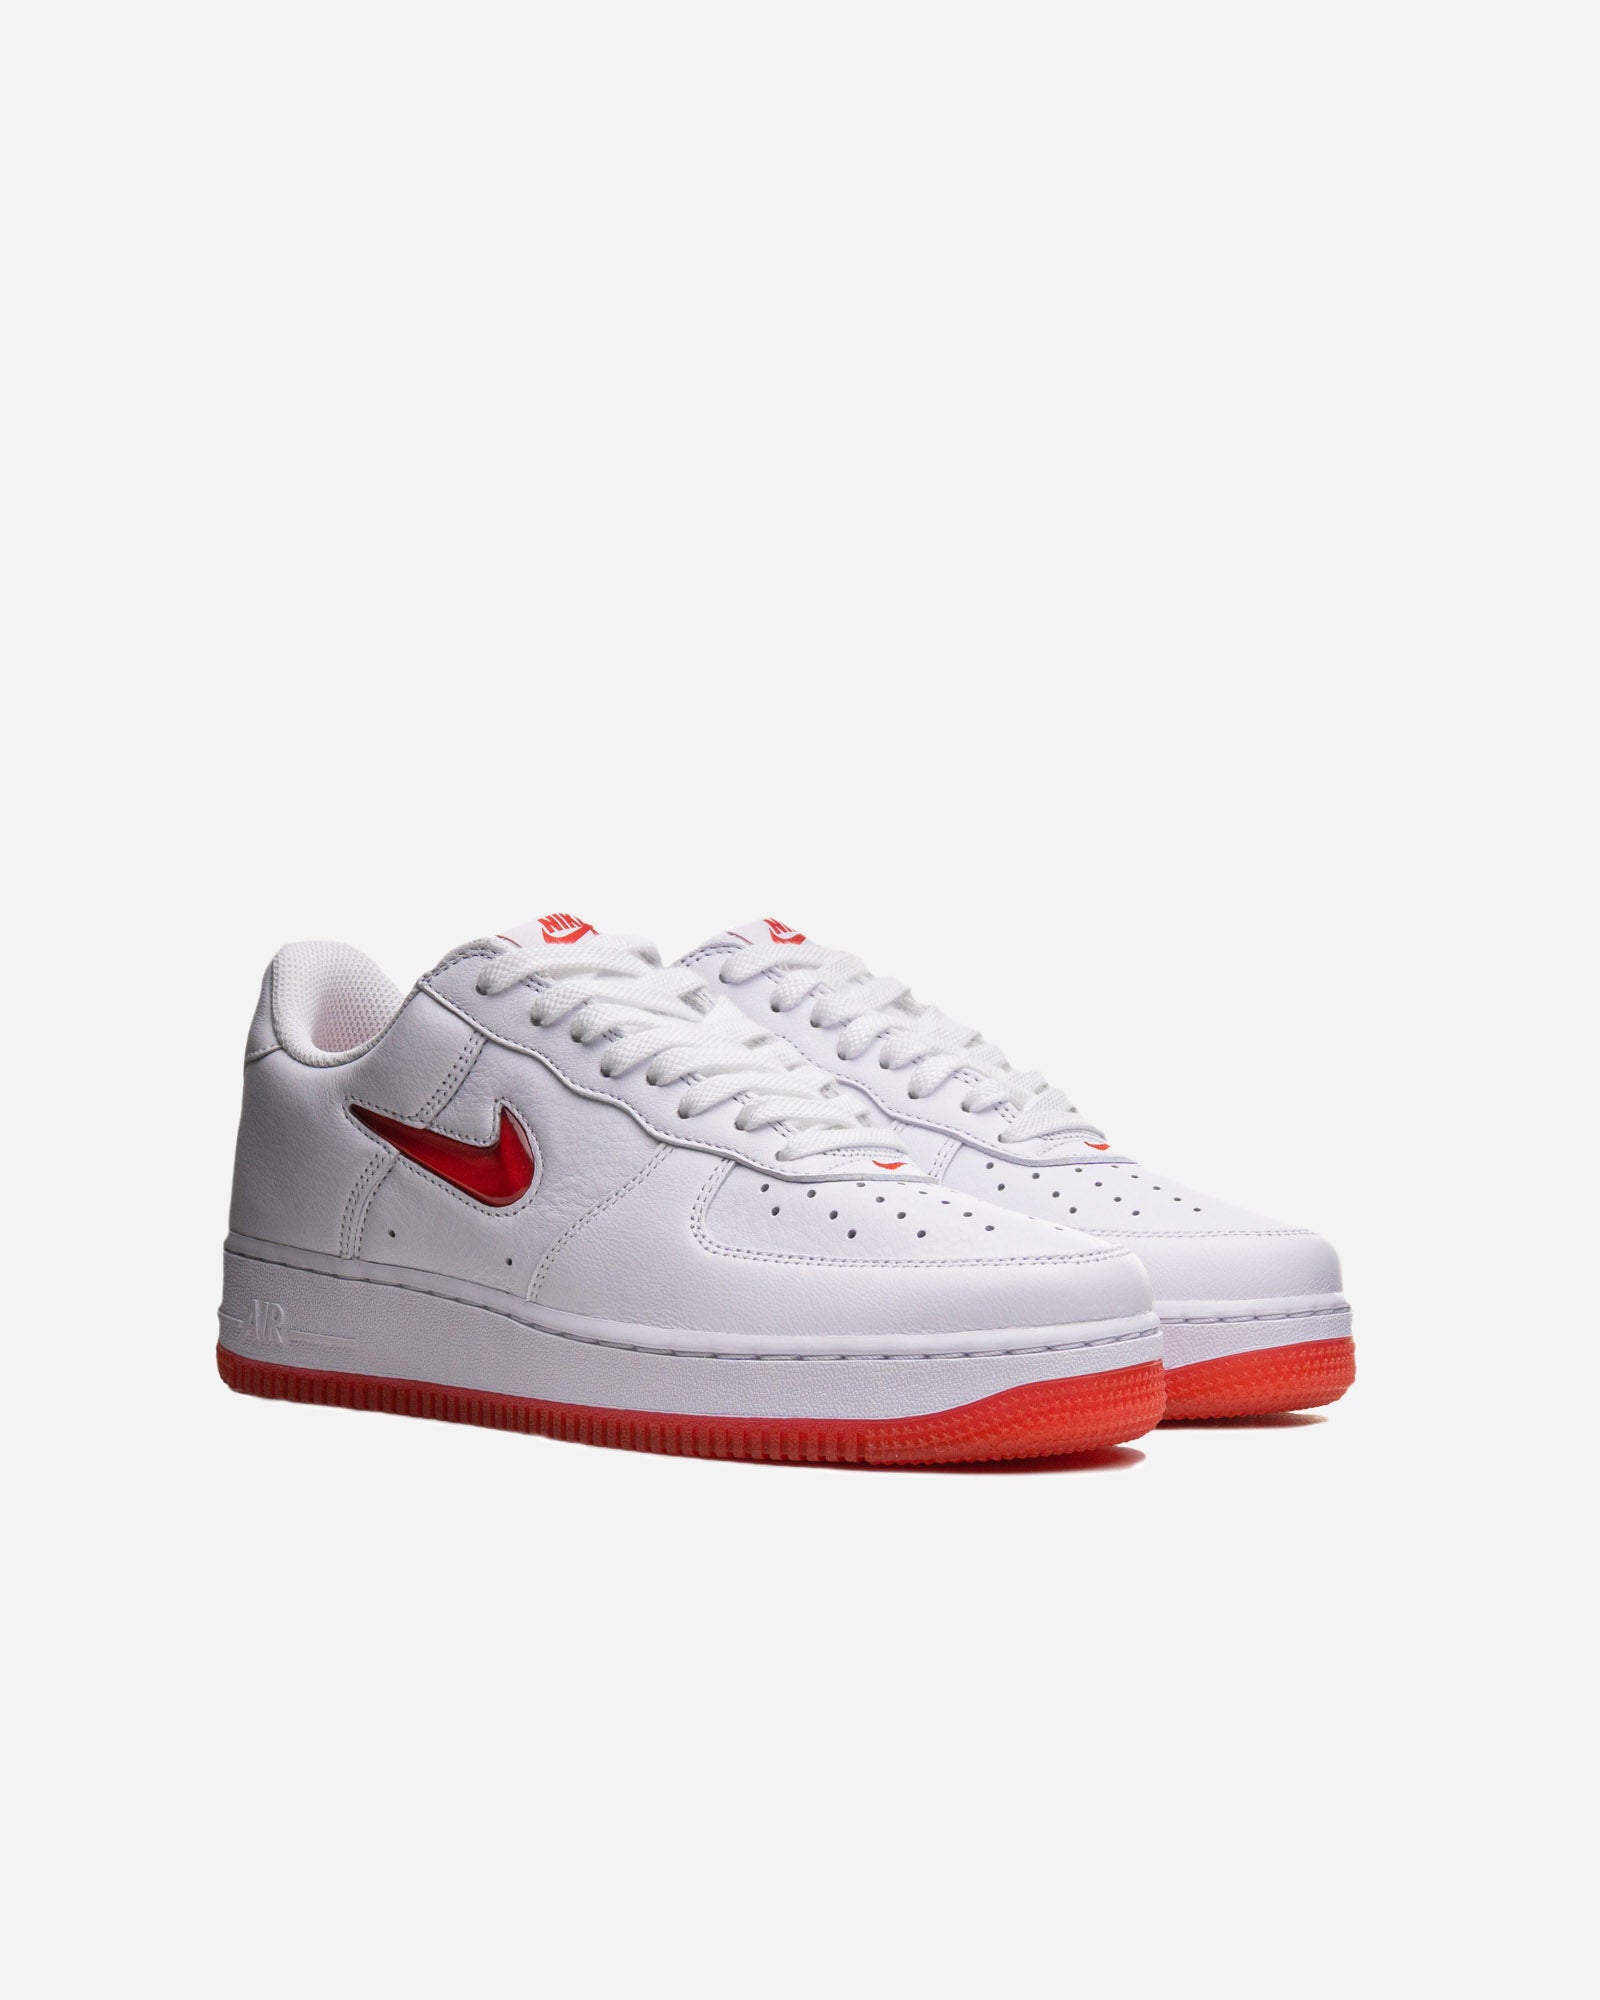 Nike Air Force 1 Low Retro "White / University Red" image